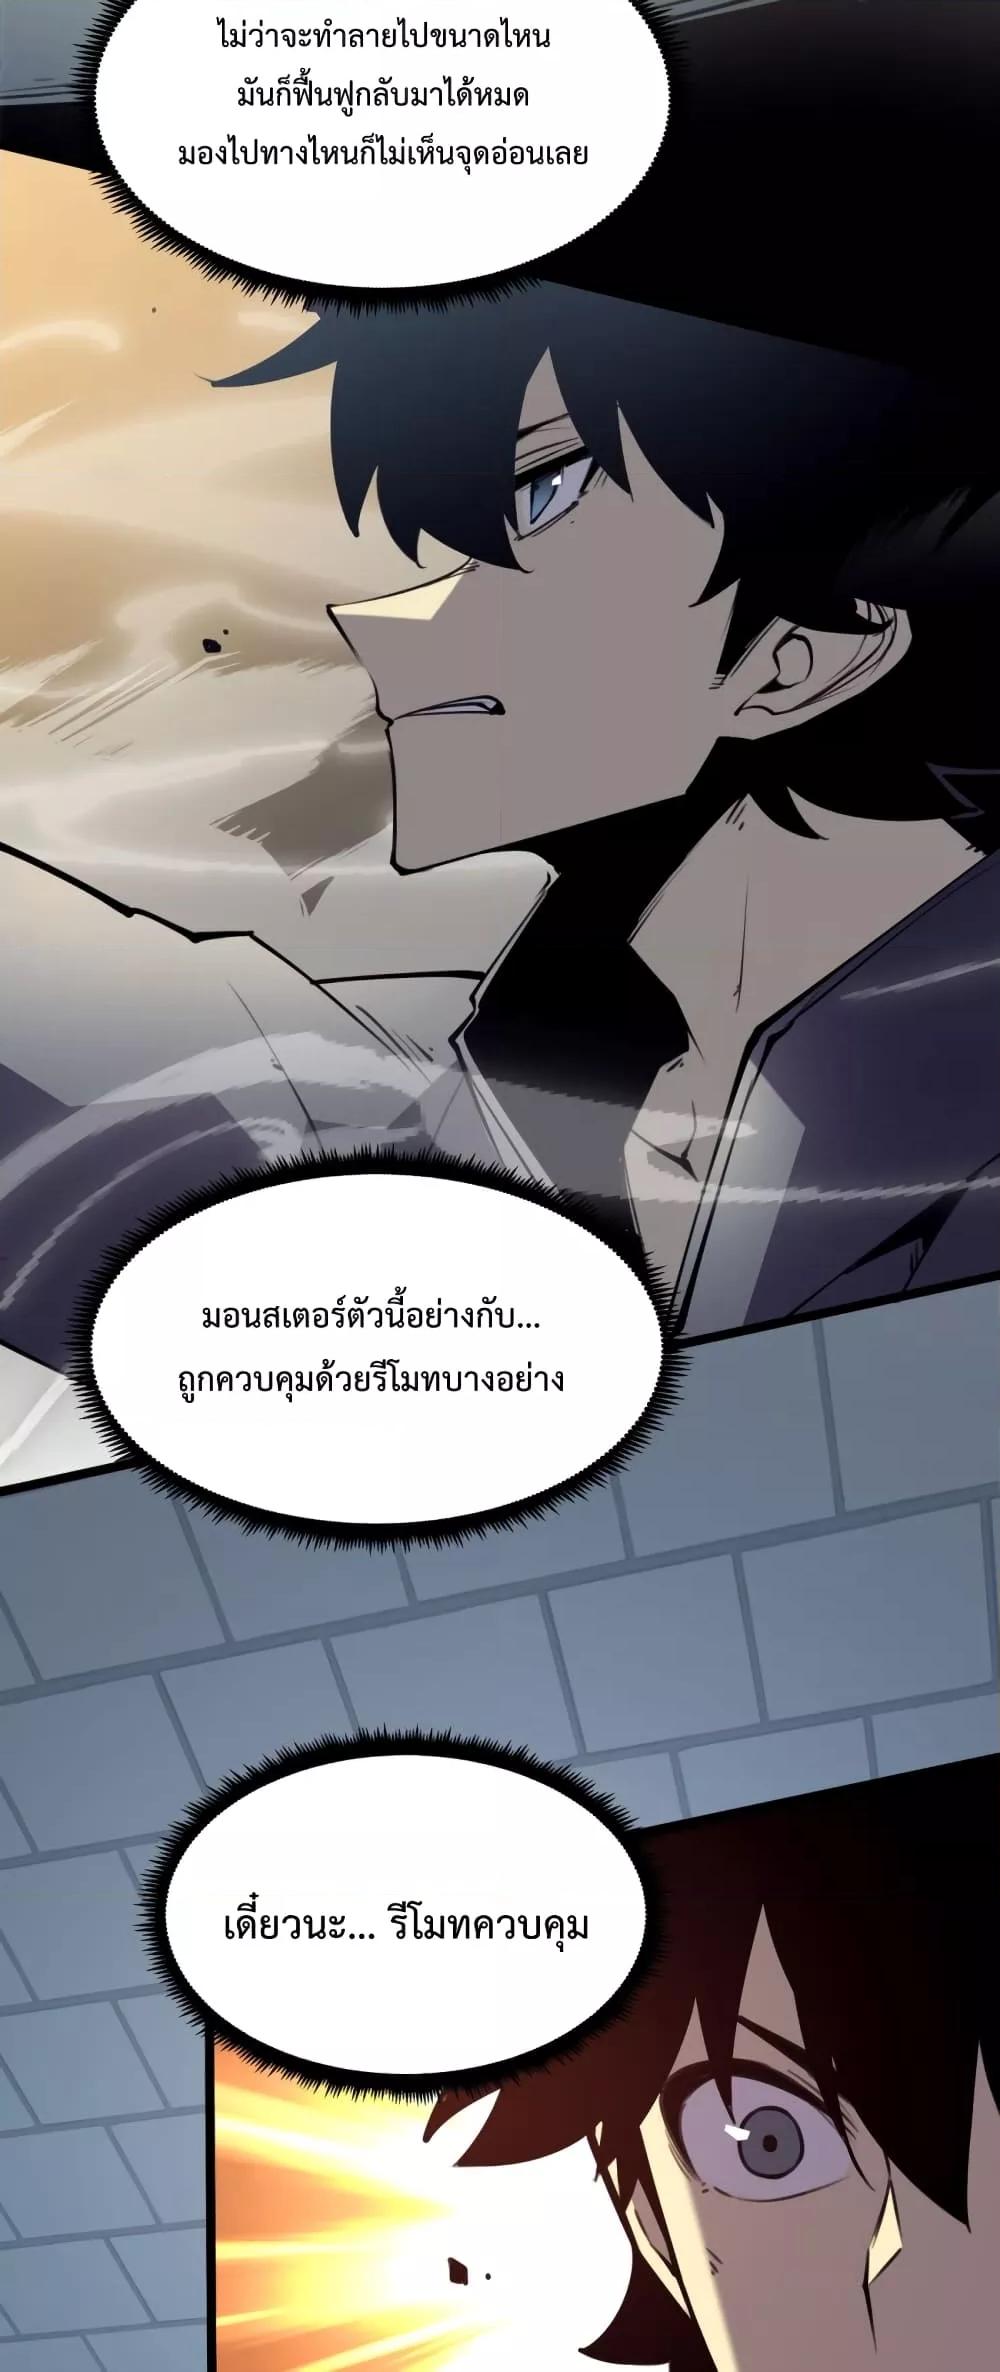 I Became The King by Scavenging โ€“ เนเธเนเธฅเน เน€เธฅเน€เธงเนเธฅเธฅเธฃเธดเนเธ เธ•เธญเธเธ—เธตเน 8 (31)